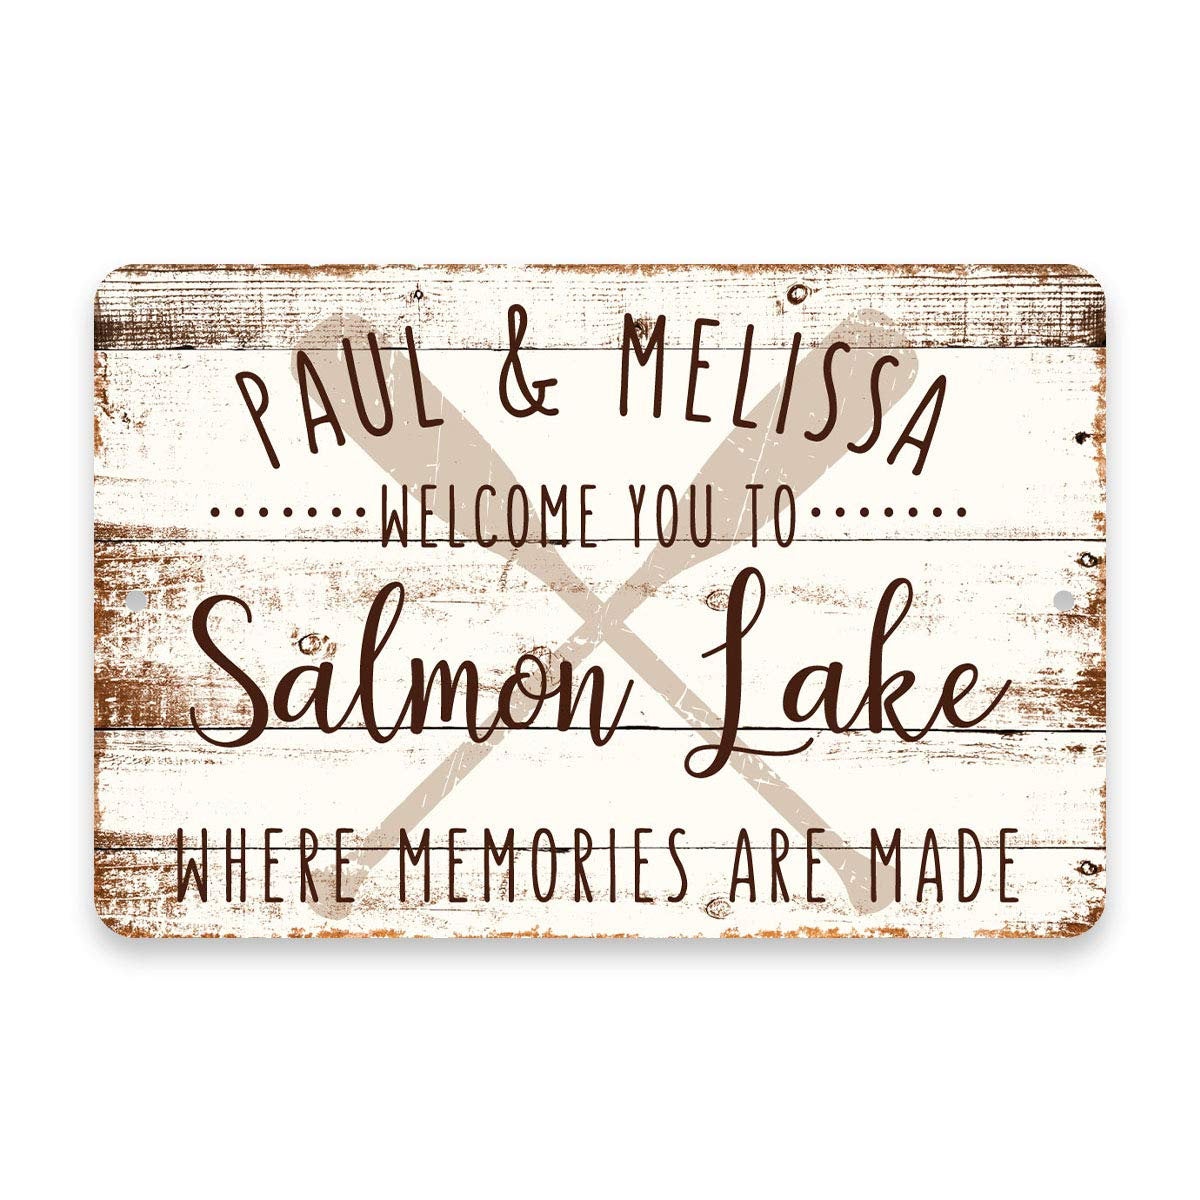 Personalized Welcome to Salmon Lake Where Memories are Made Sign - 8 X 12 Metal Sign with Wood Look